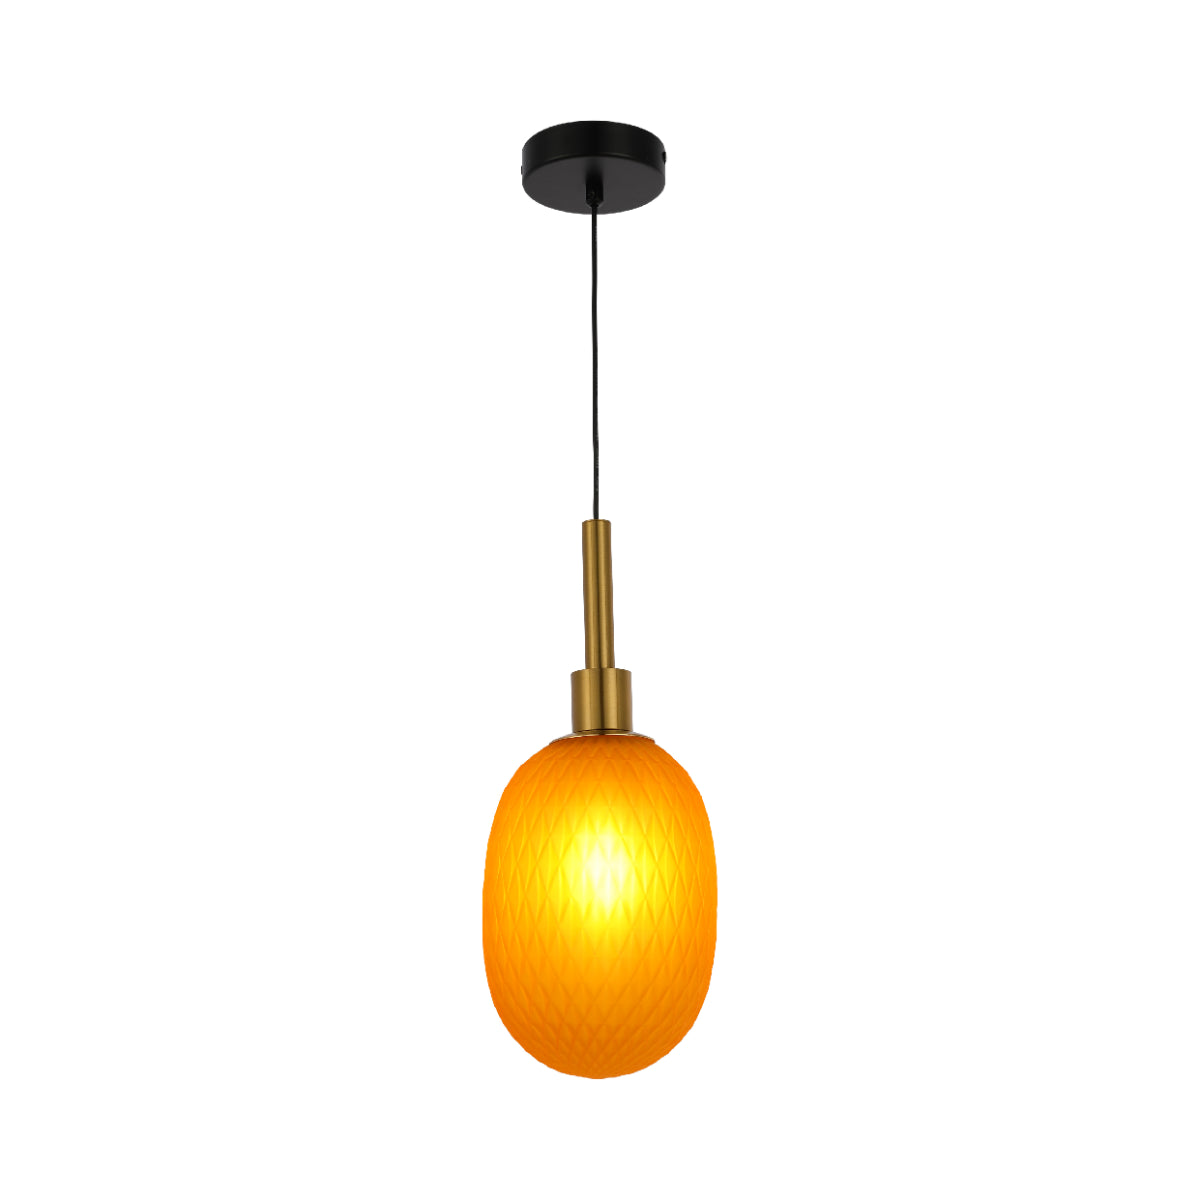 Main image of Opalescent Ellipsoid Pendant Light with Gold Detail 150-19026